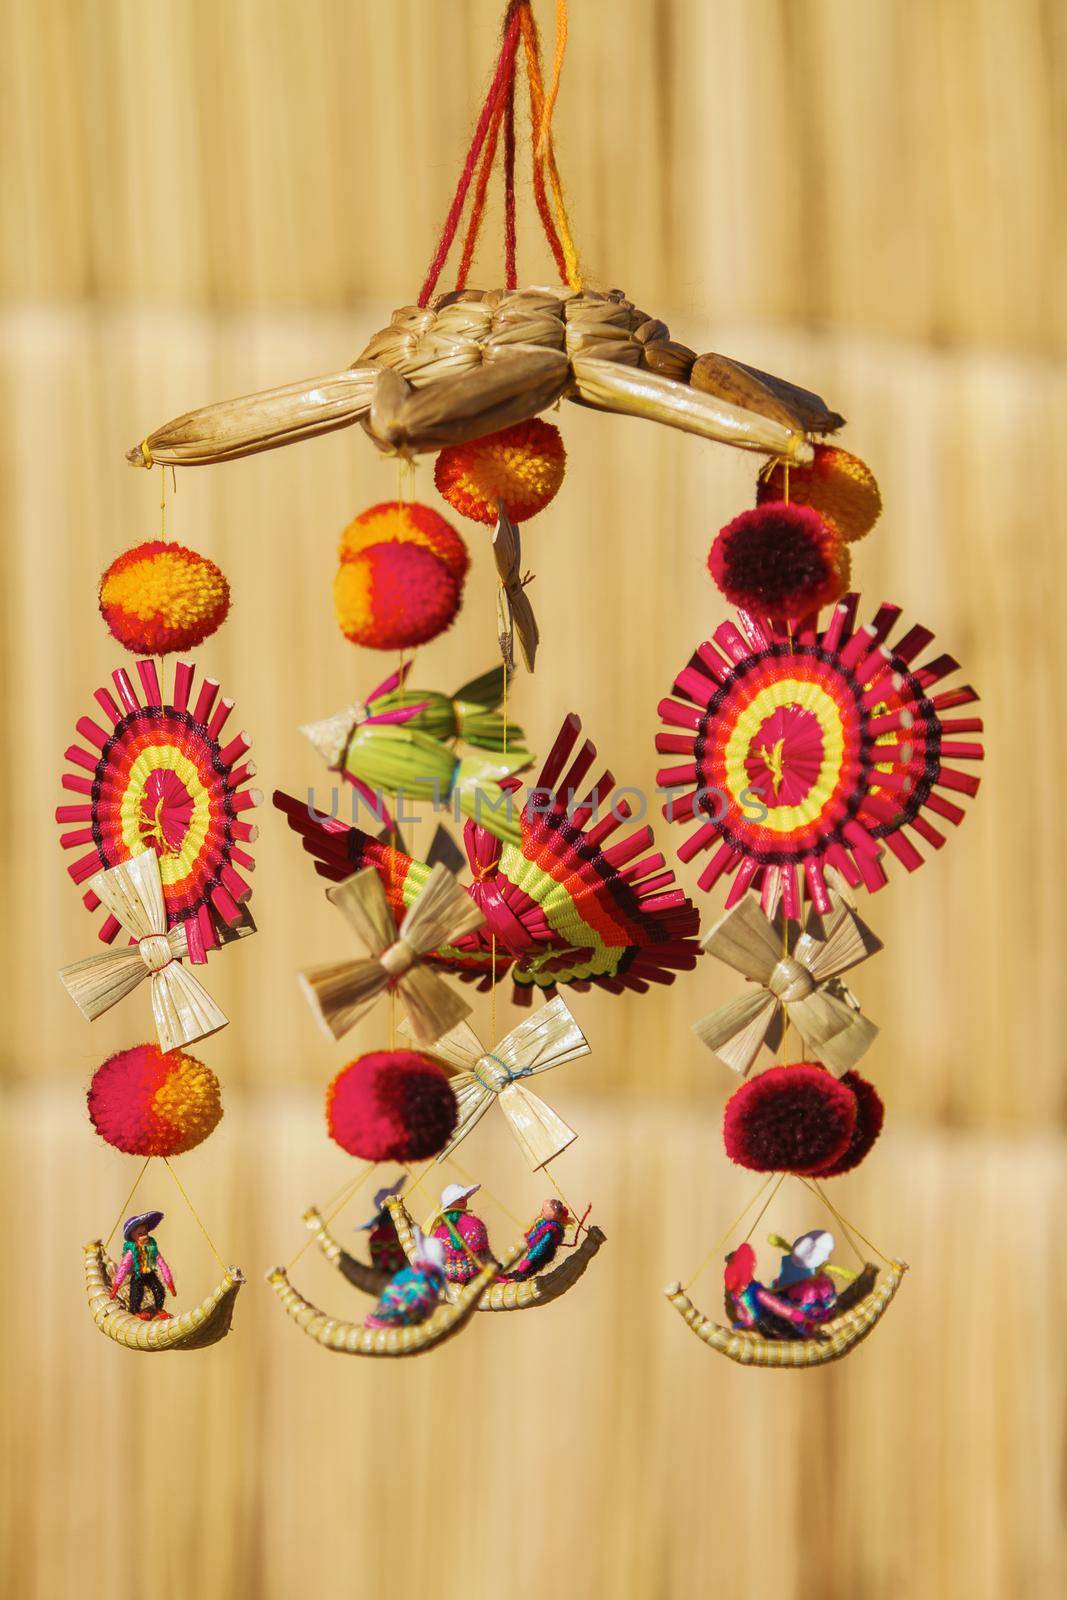 UROS, PERU - JULY 29, 2012: Souvenir made by People at Floating Islands of Uros at Lake Titicaca in Peru and Bolivia